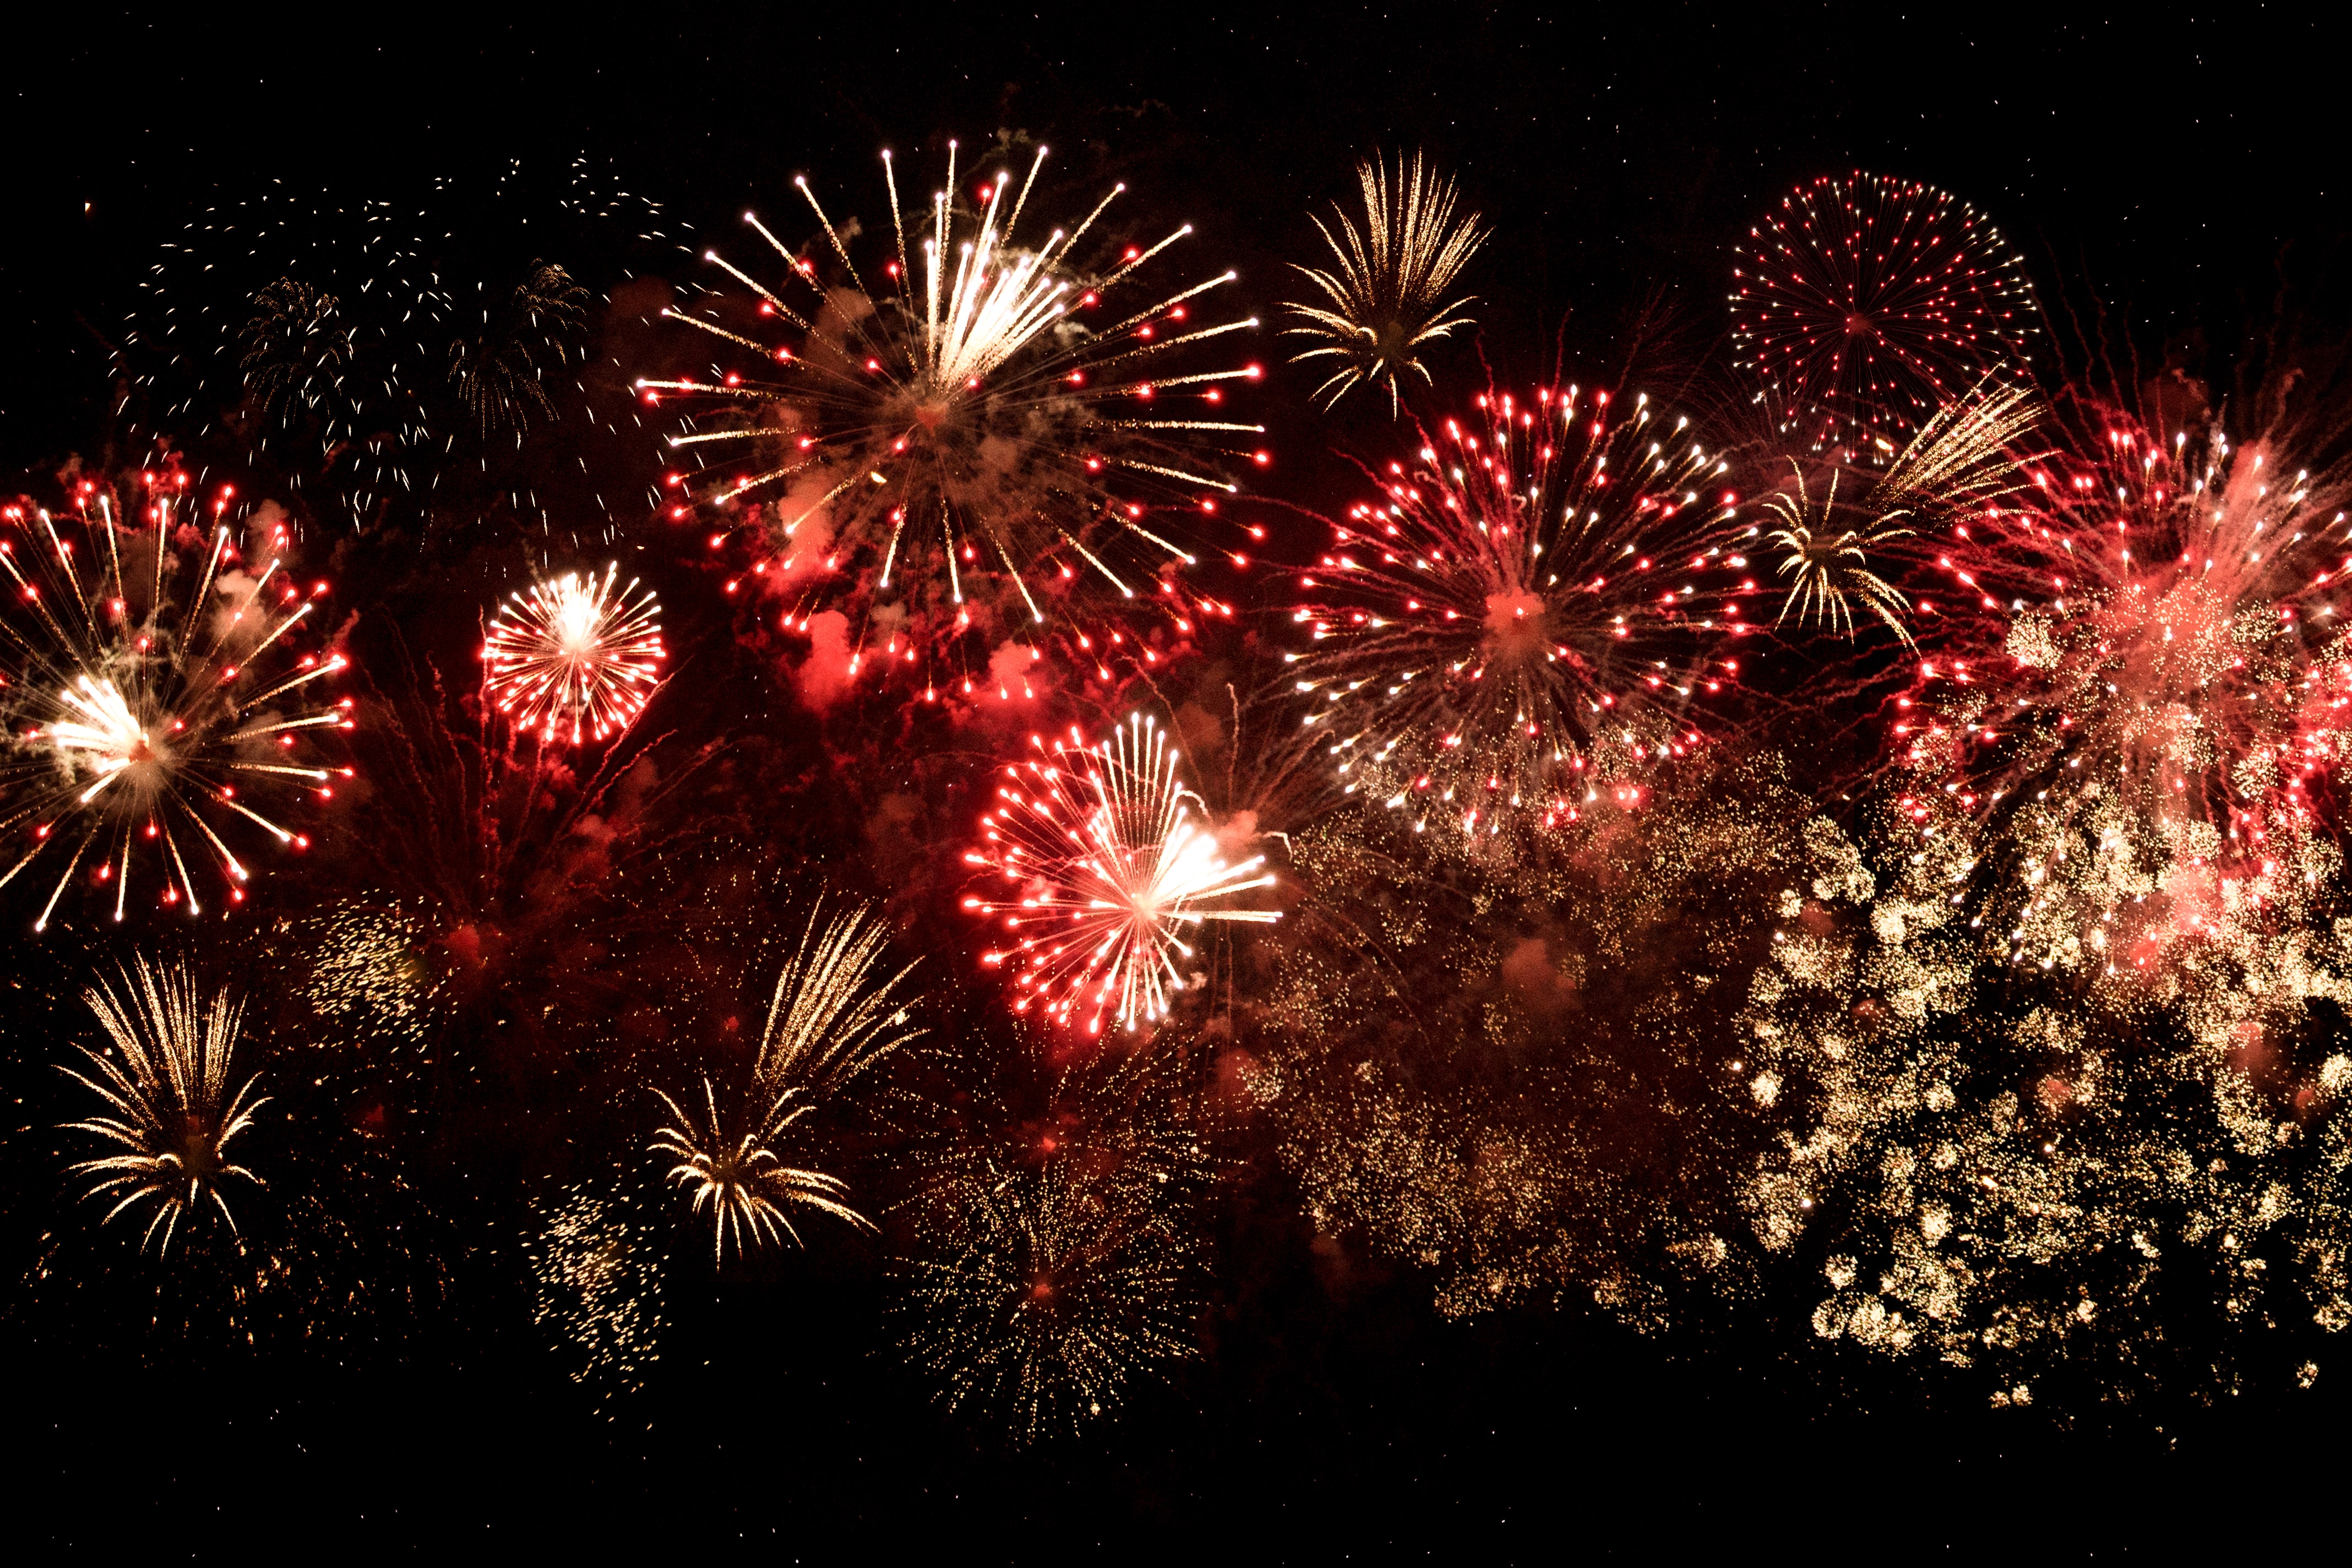 Where to watch Fireworks near Oak Park this 4th of July